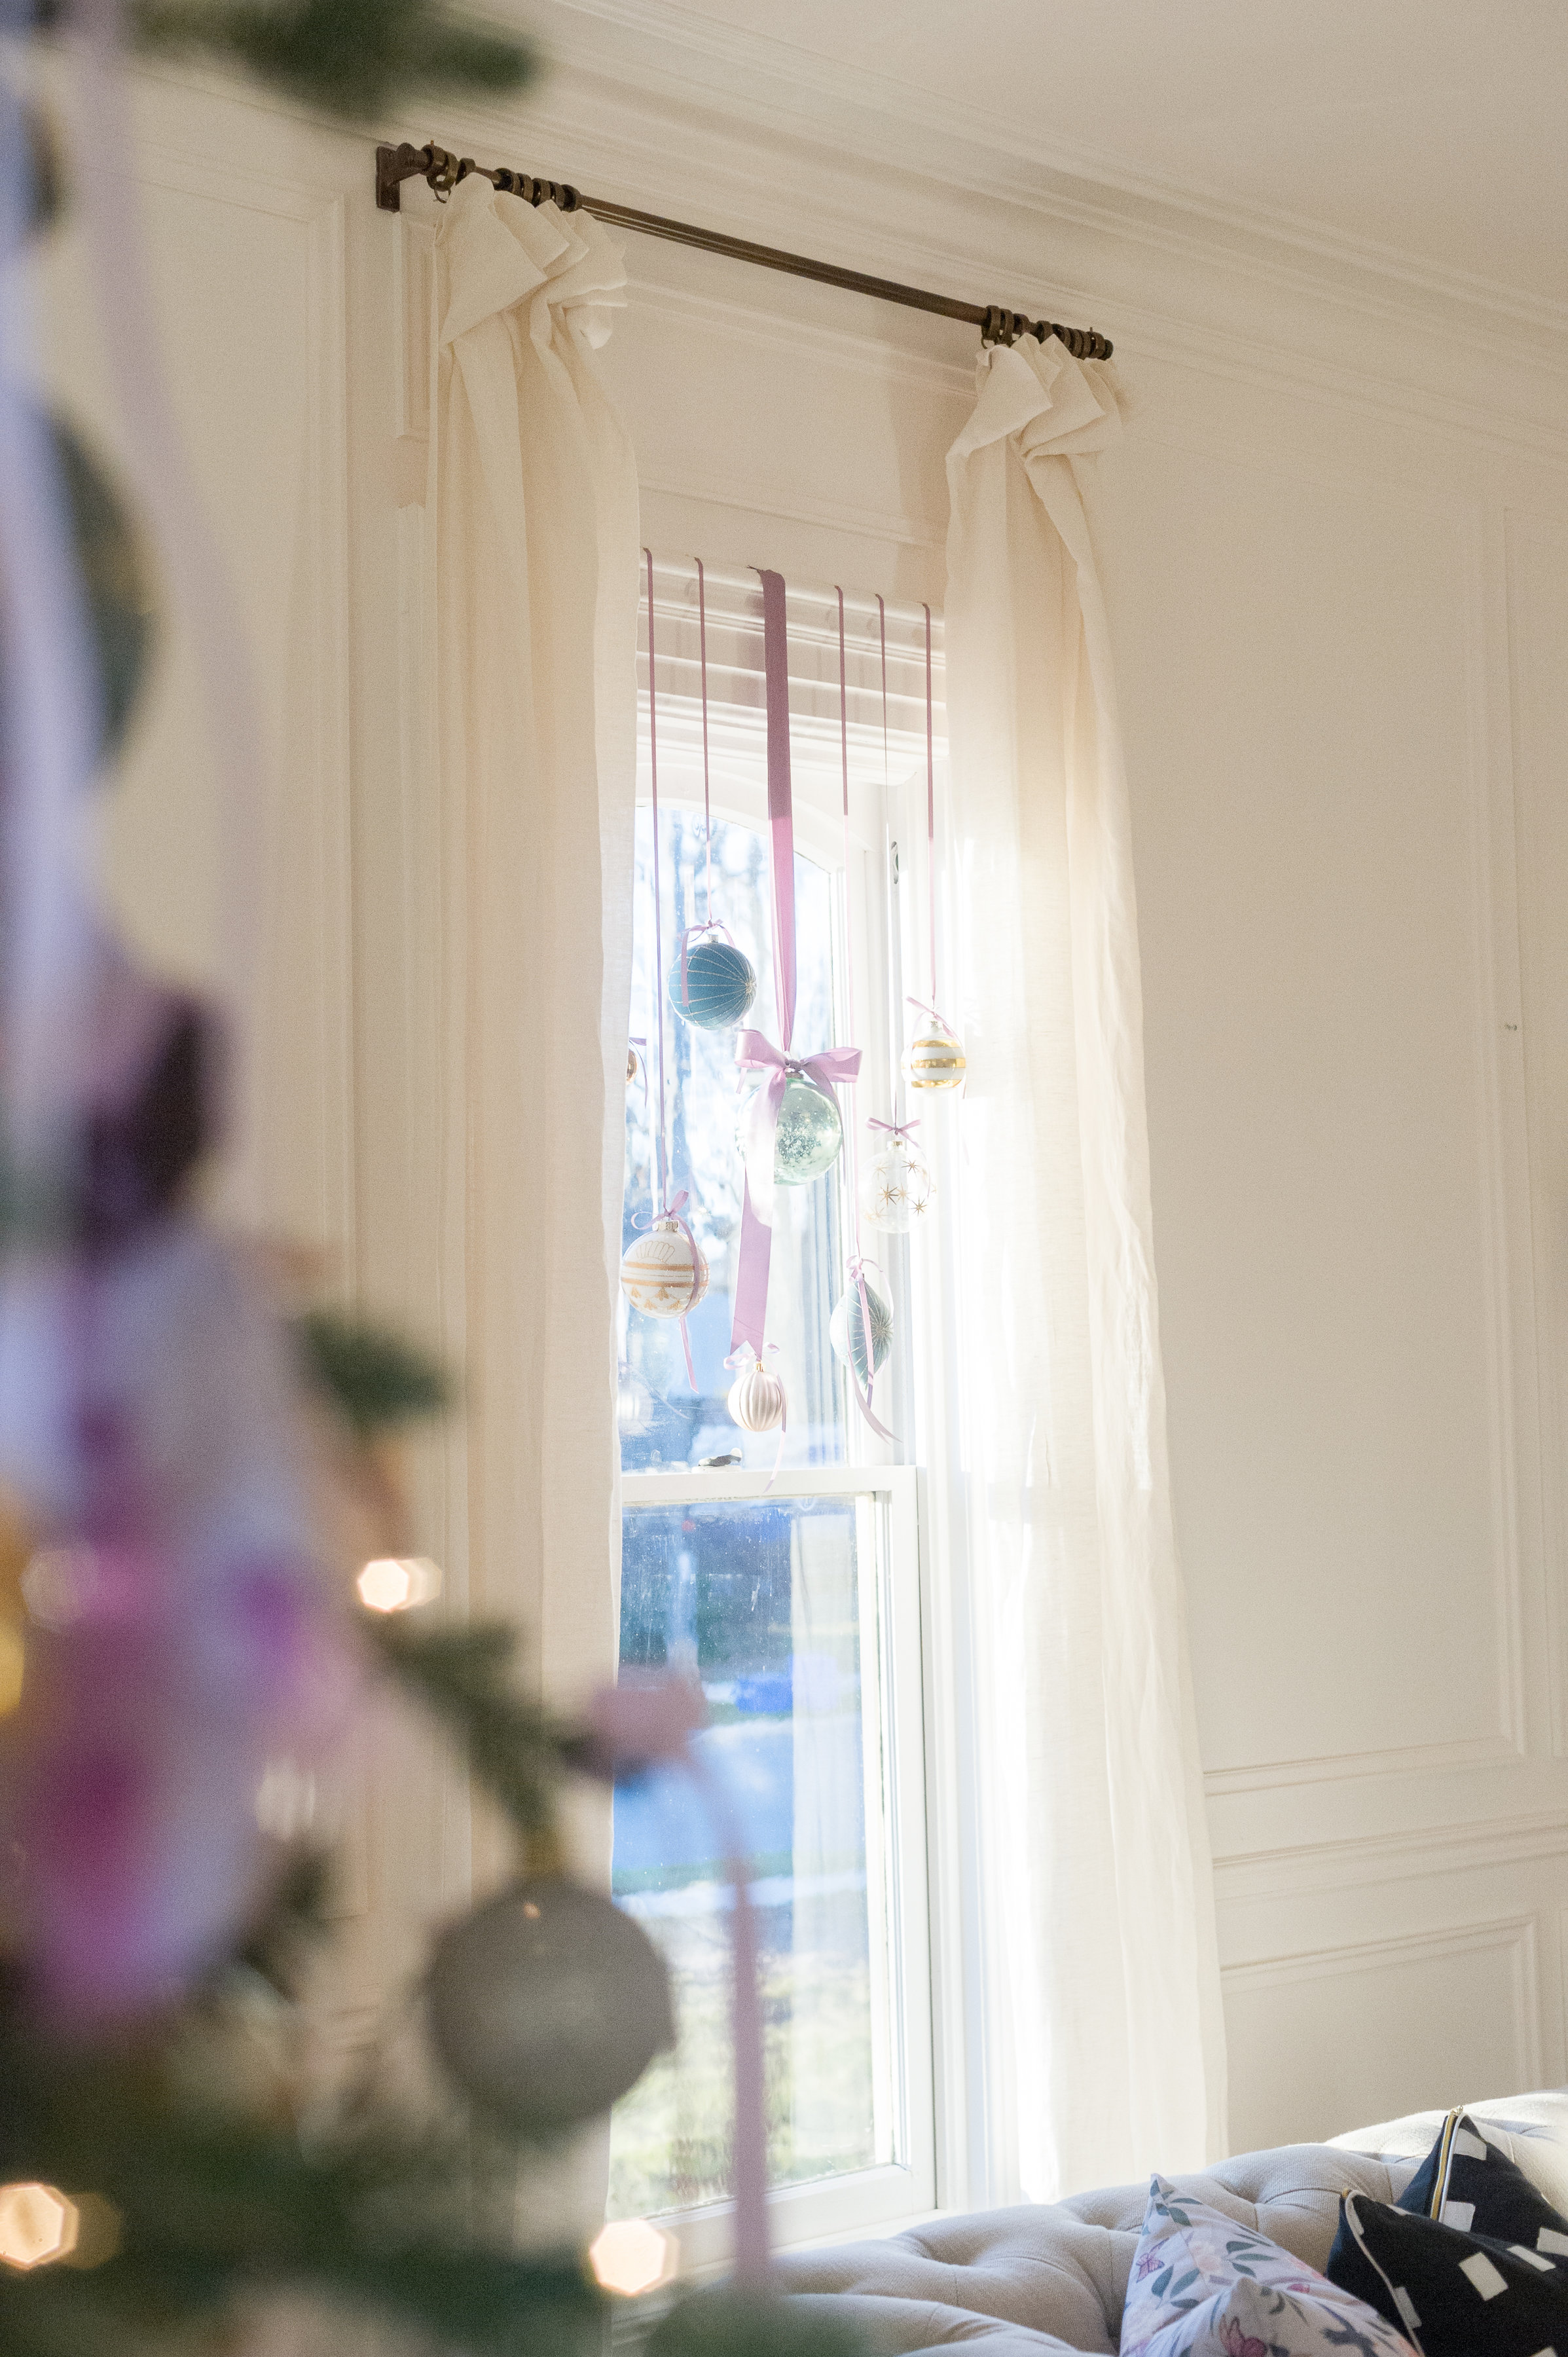 ornaments hung in window - The Leslie Style